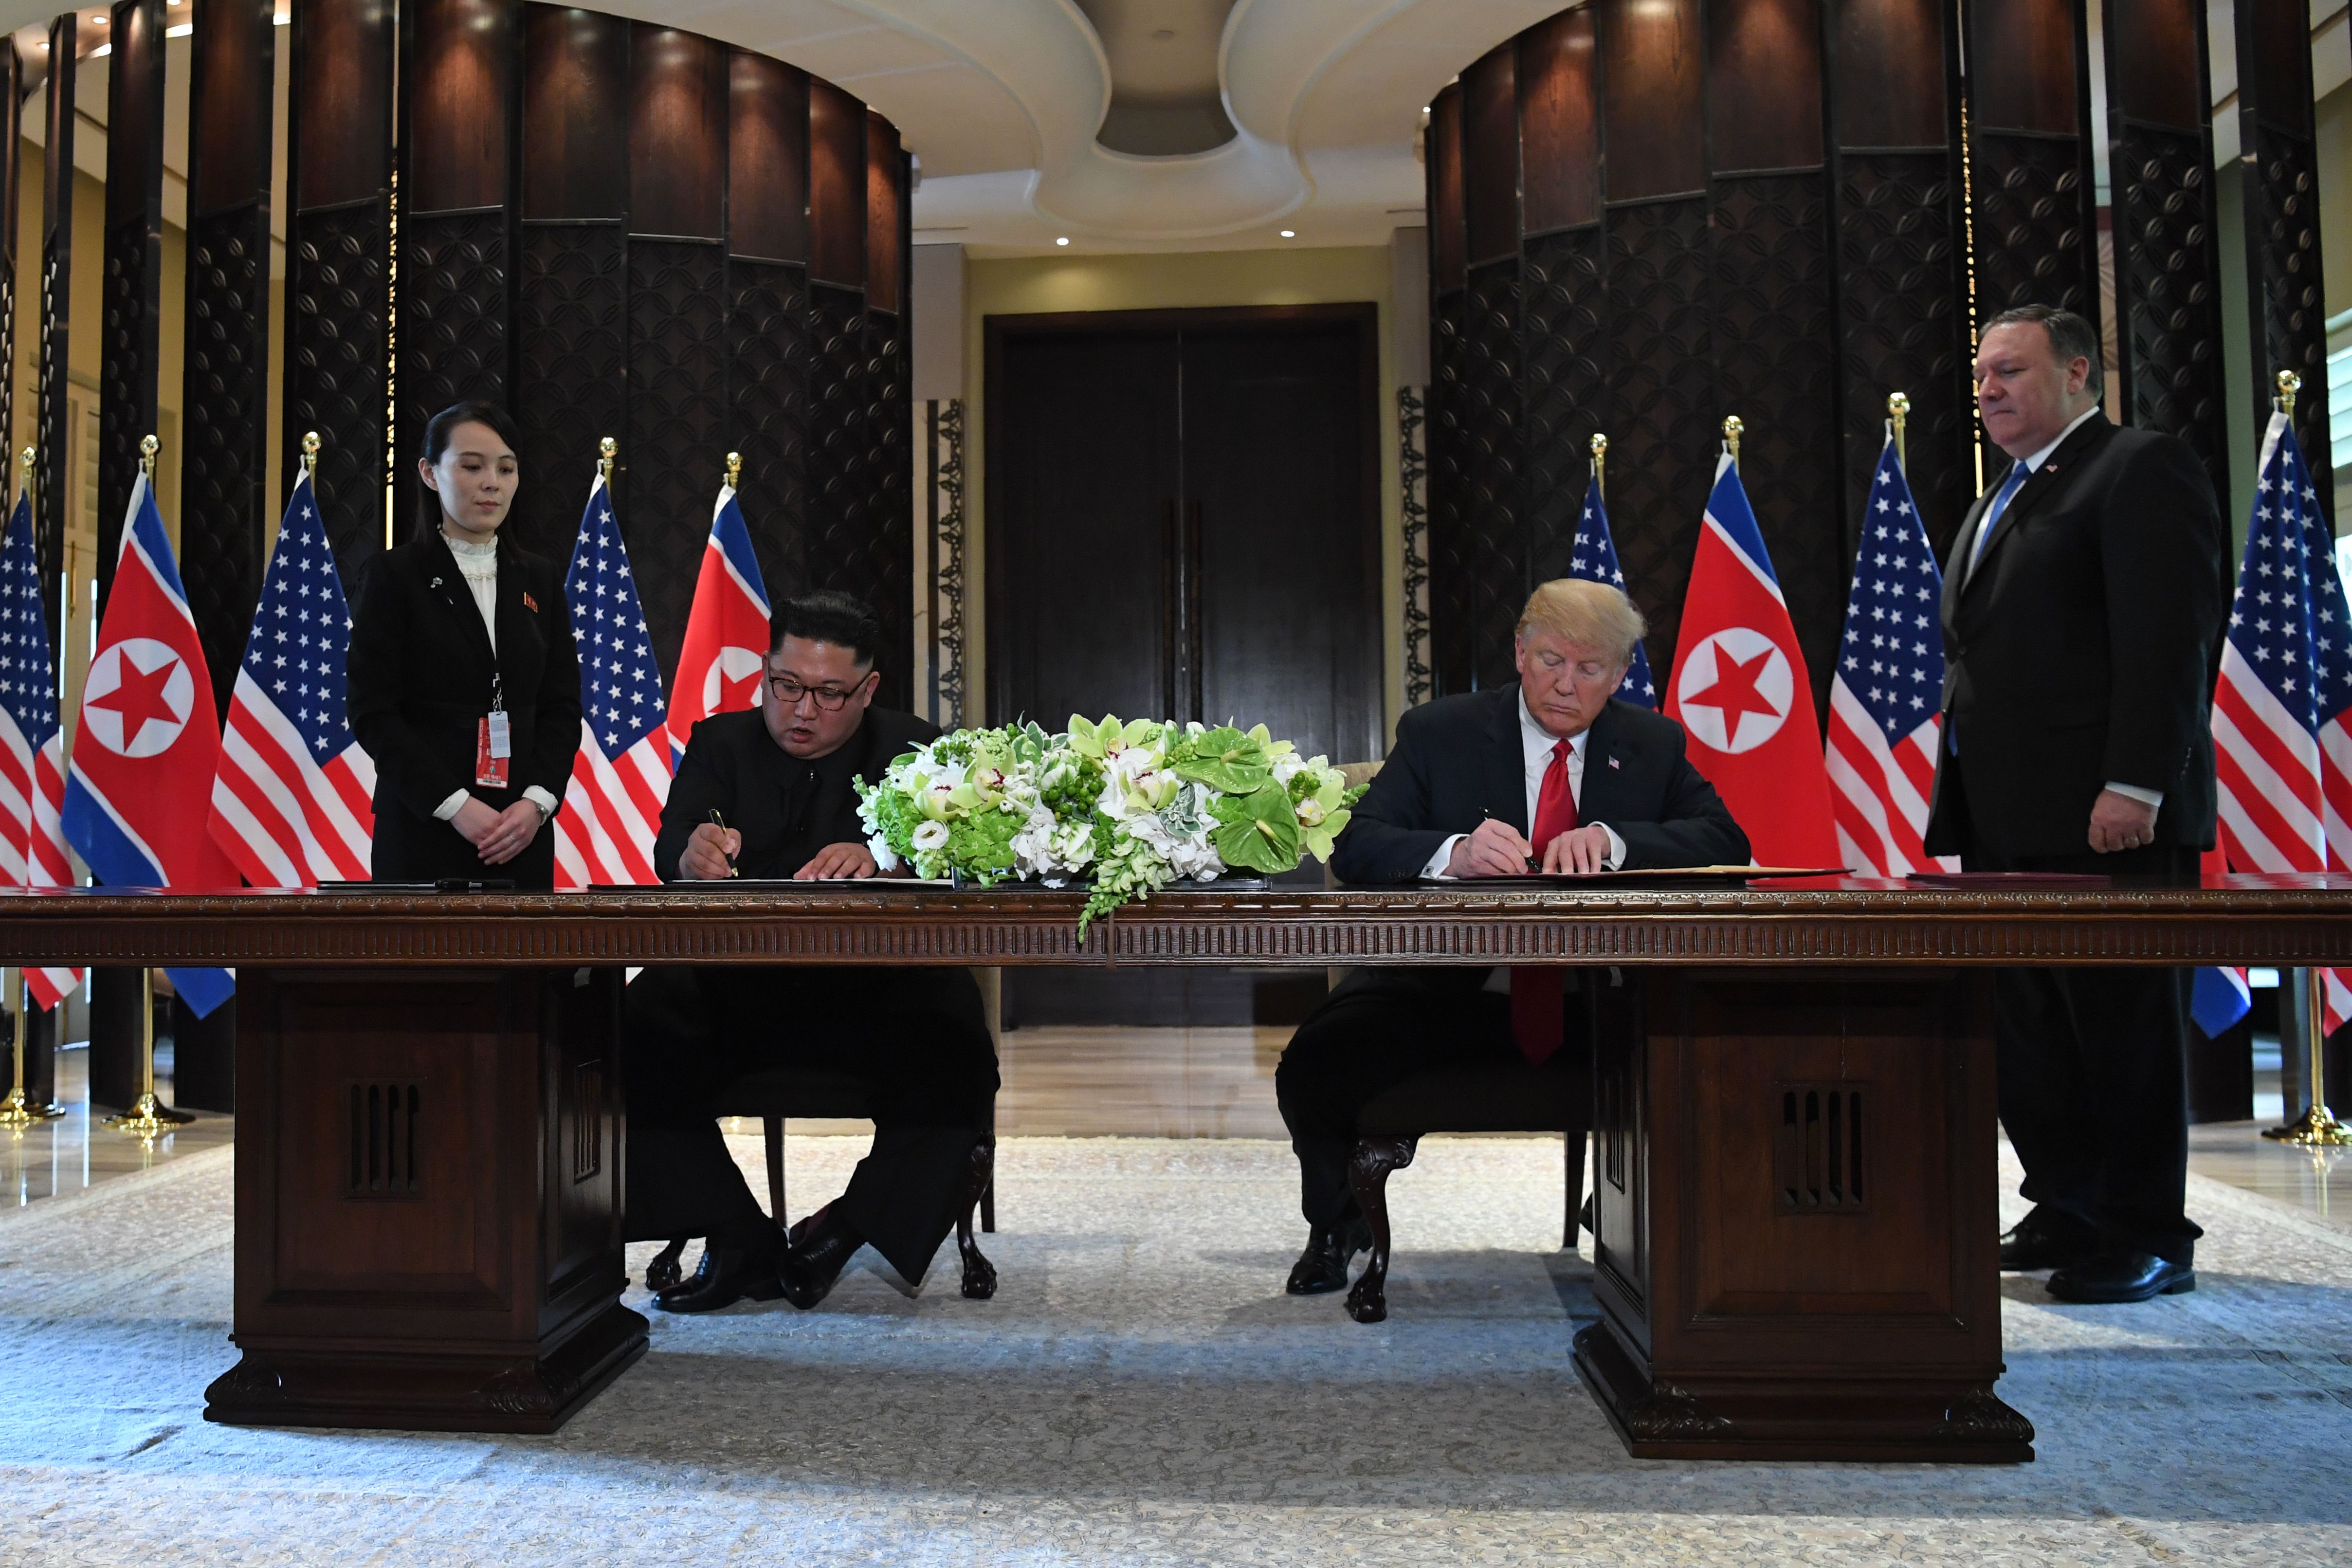 US President Donald Trump and North Korea's leader Kim Jong Un sign documents as US Secretary of State Mike Pompeo (R) and the North Korean leader's sister Kim Yo Jong (L) look on at a signing ceremony during their historic US-North Korea summit, at the Capella Hotel on Sentosa island in Singapore on June 12, 2018. (SAUL LOEB/AFP/Getty Images)